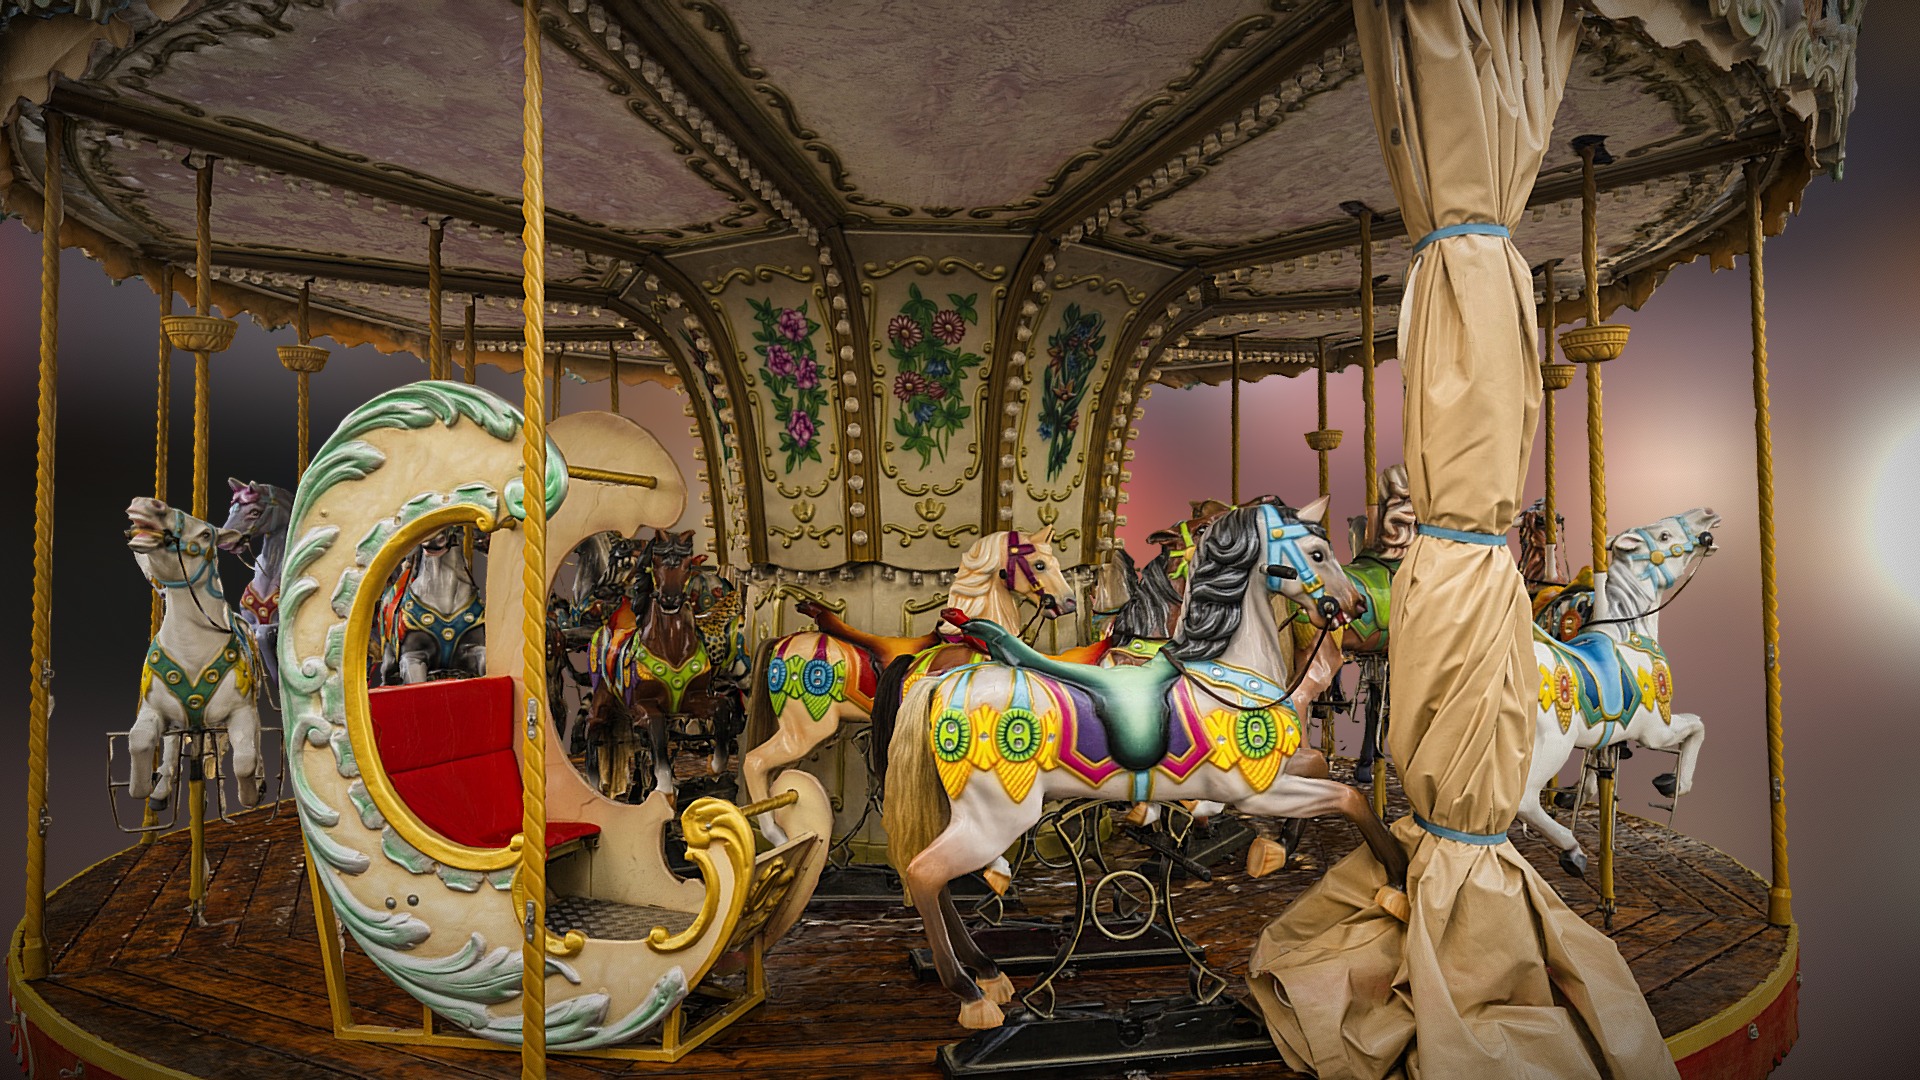 3D model carousel / carrusel scan - This is a 3D model of the carousel / carrusel scan. The 3D model is about a group of people on a carousel.